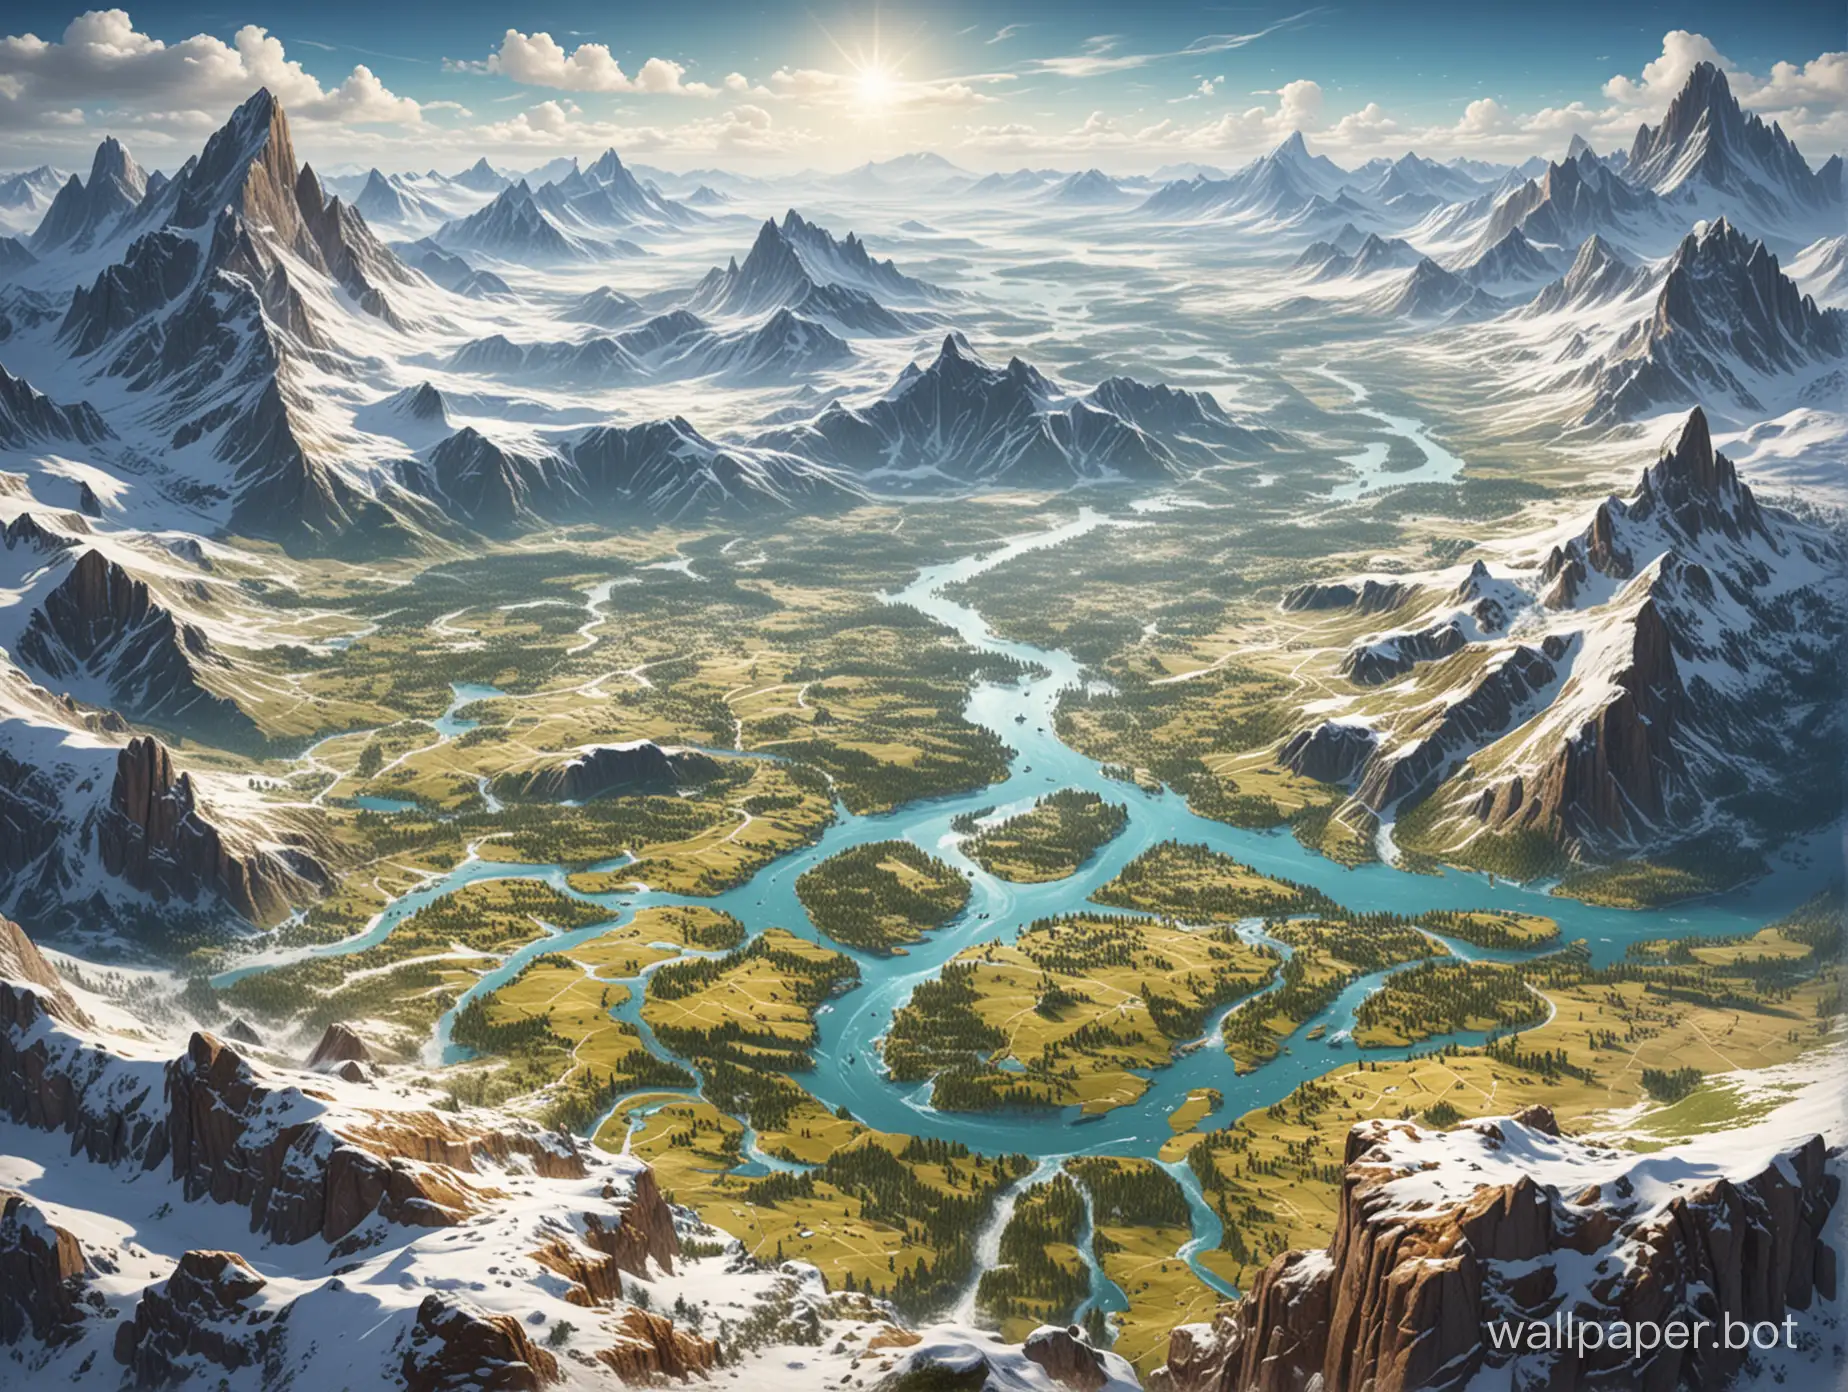 TopView-Fantasy-World-Map-with-Snowy-Landscapes-Forests-Mountains-Rivers-Plains-and-Cities